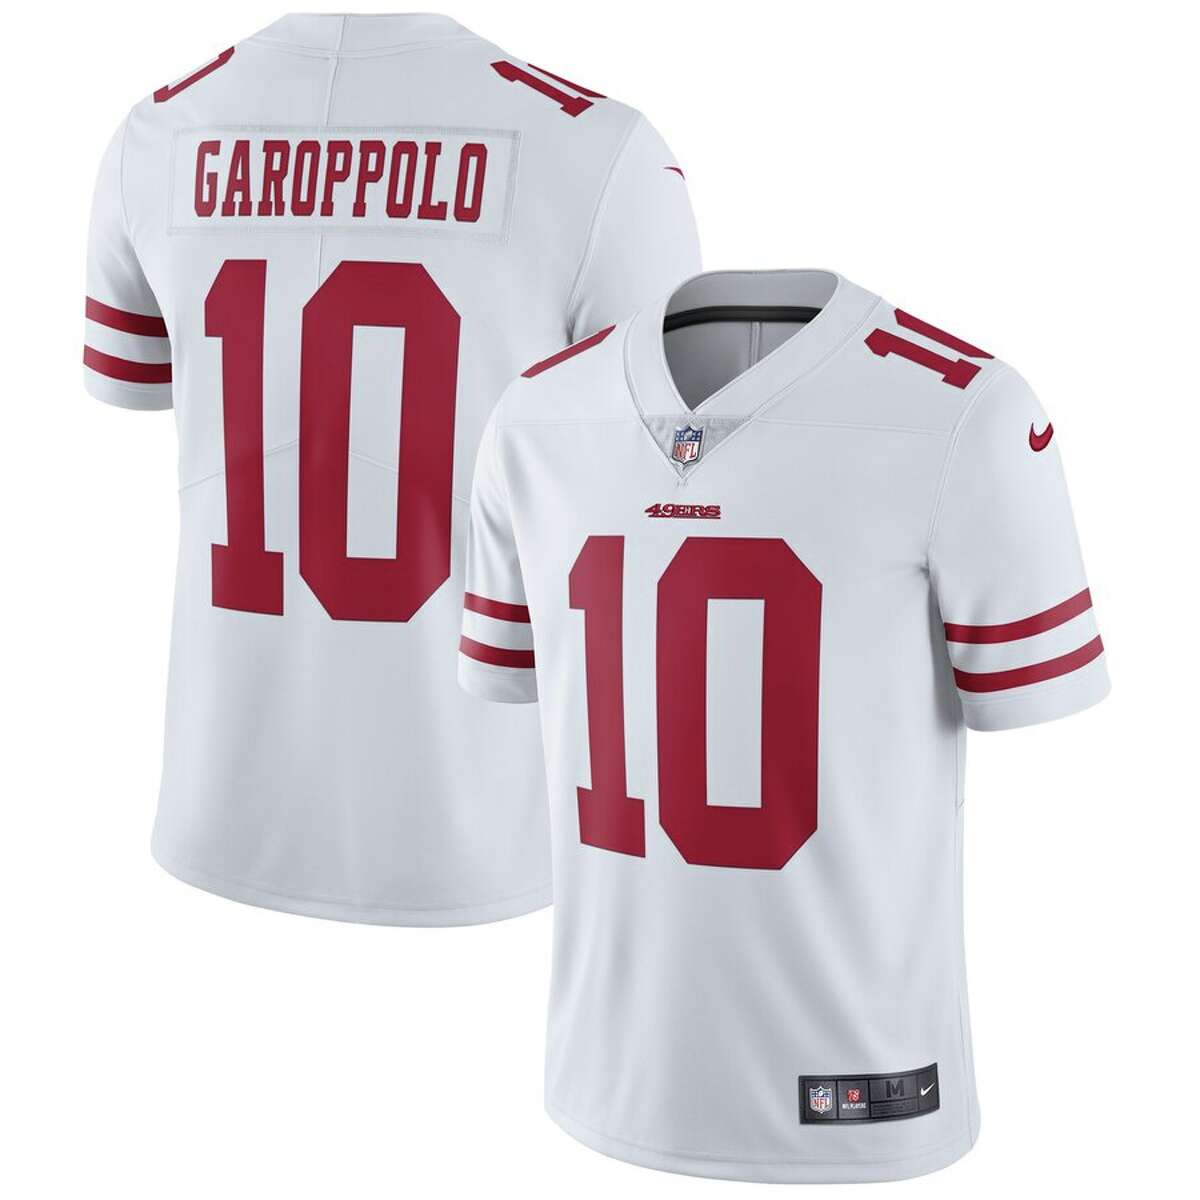 49ers 2019 jersey